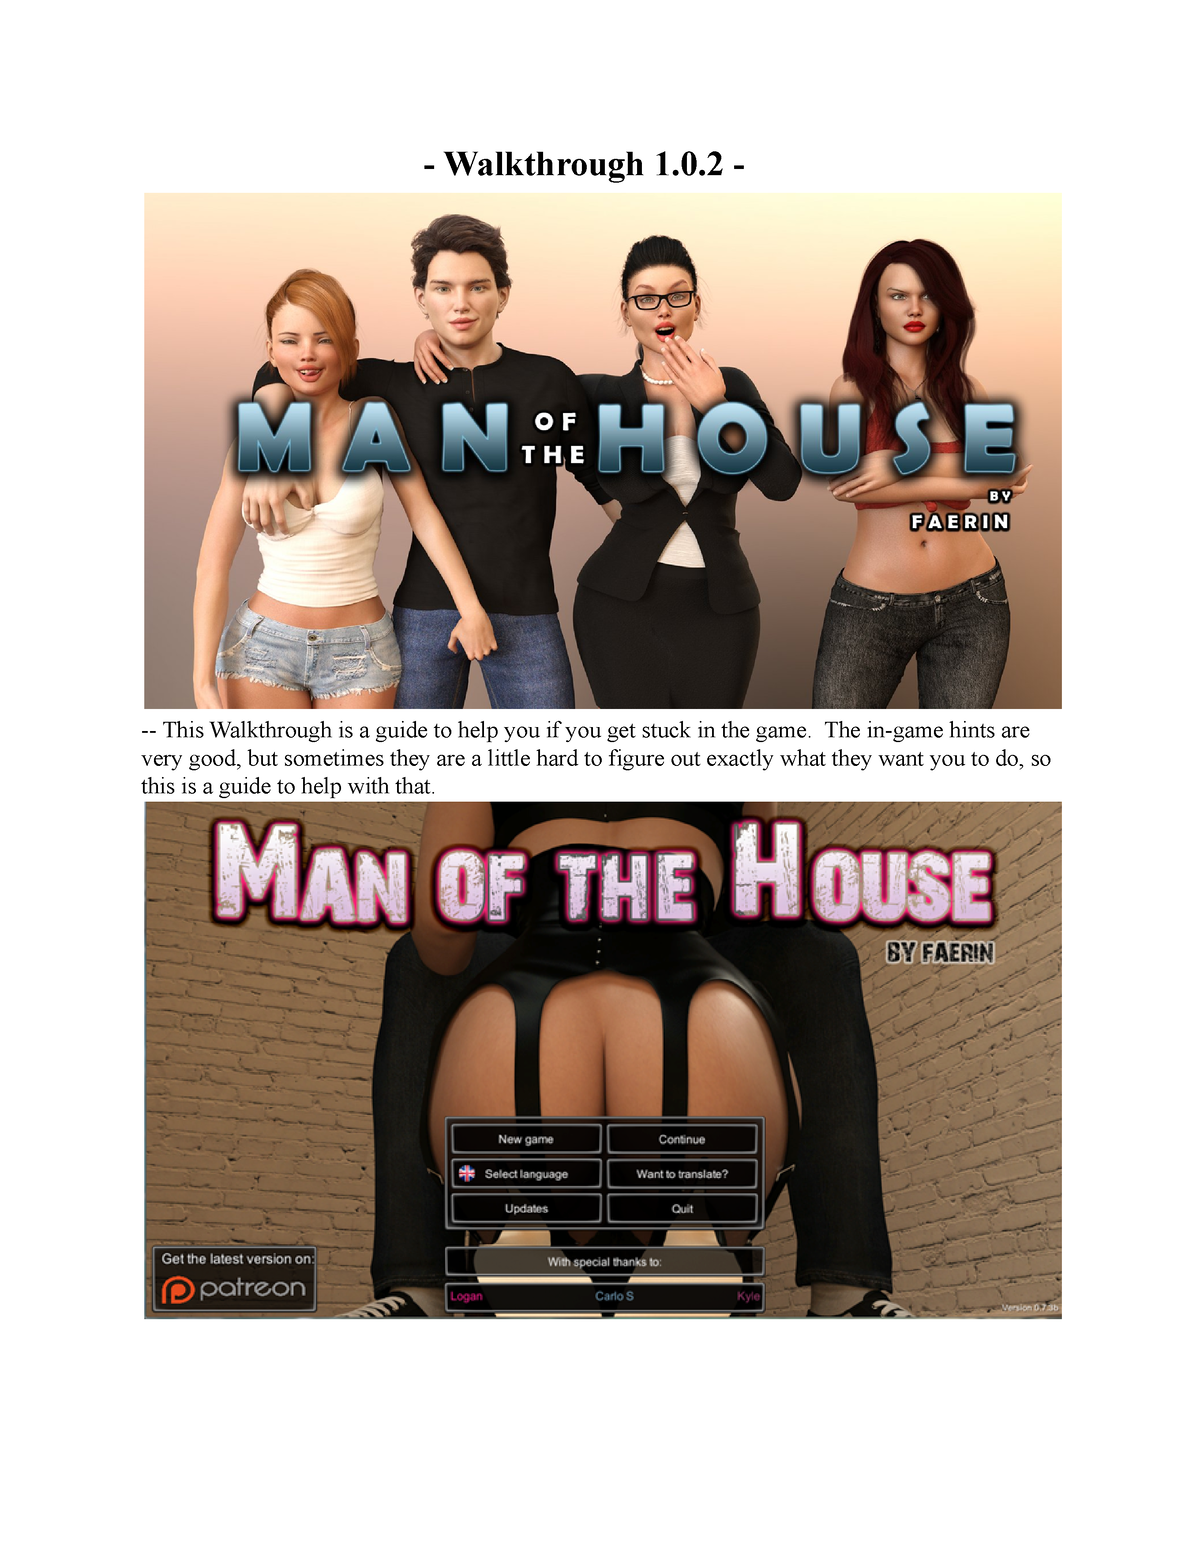 man-of-the-house-1-nothing-walkthrough-1-0-this-walkthrough-is-a-guide-to-help-you-if-you